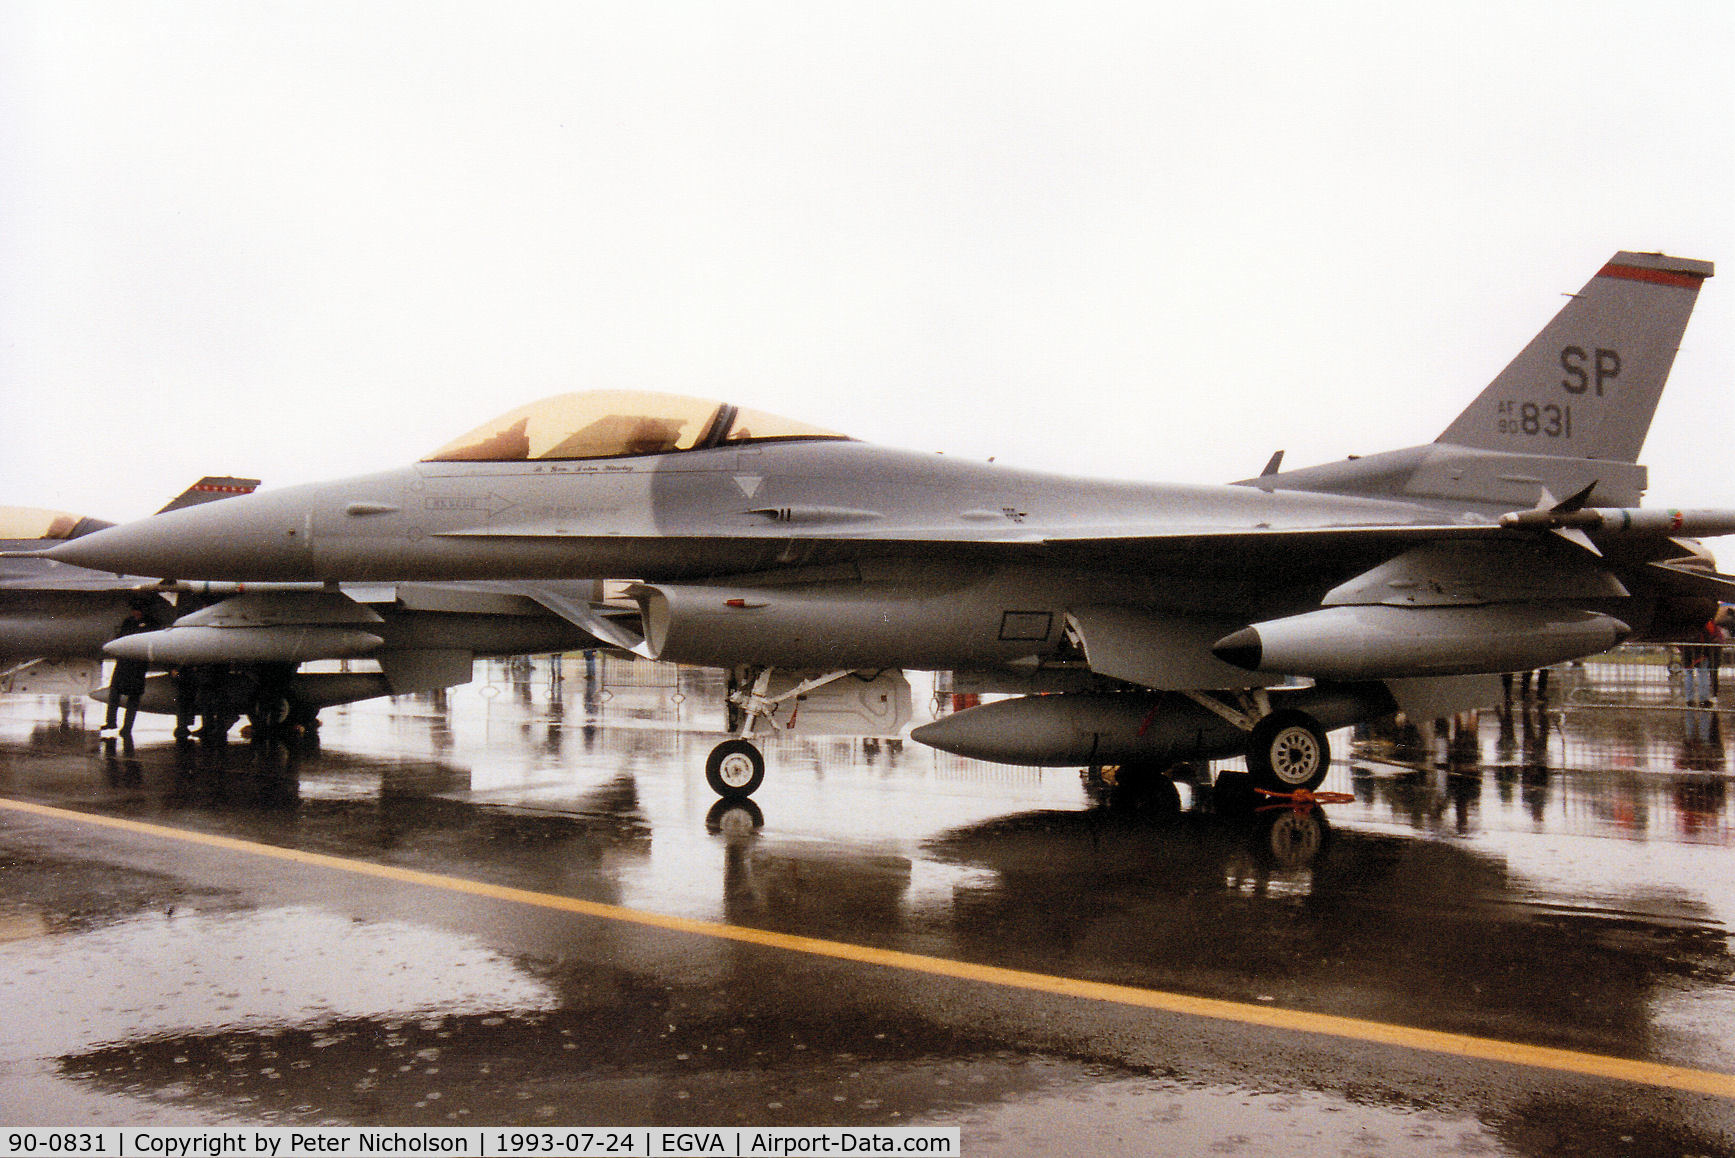 90-0831, 1990 General Dynamics F-16C Fighting Falcon C/N CC-31, Another view of Rust 01 from Spangdahlem's 480 Fighter Squadron/52nd Fighter Wing on display at the 1993 Intnl Air Tattoo at RAF Fairford - the weather conditions had changed from earlier.